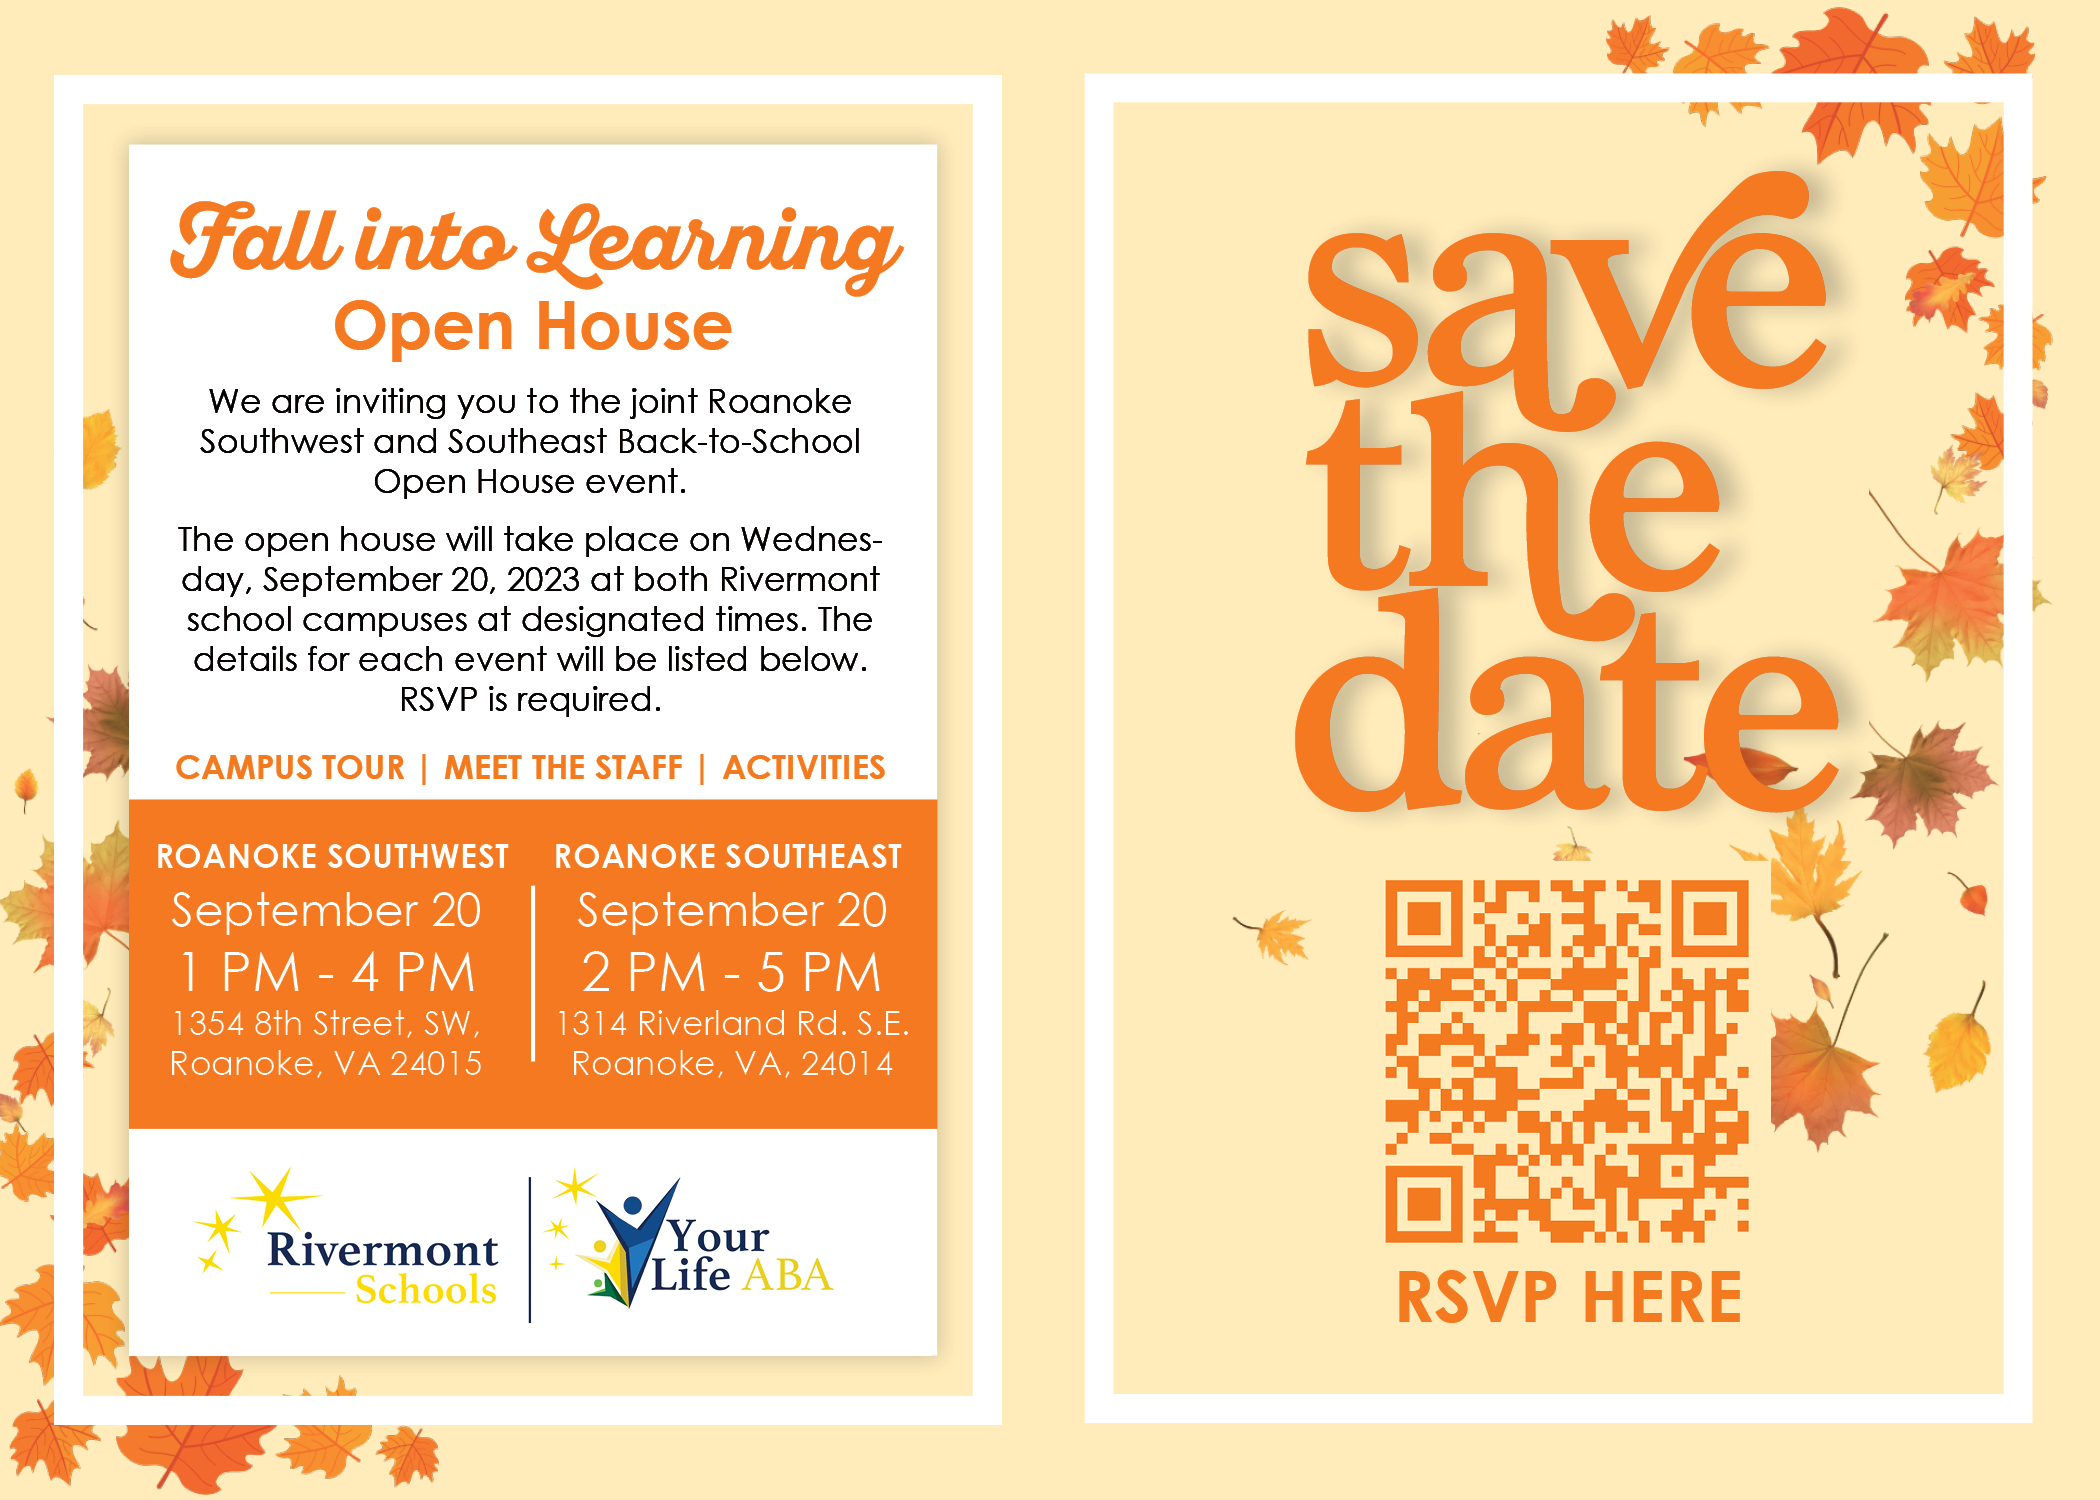 Save The Date Poster for Fall Into Learning